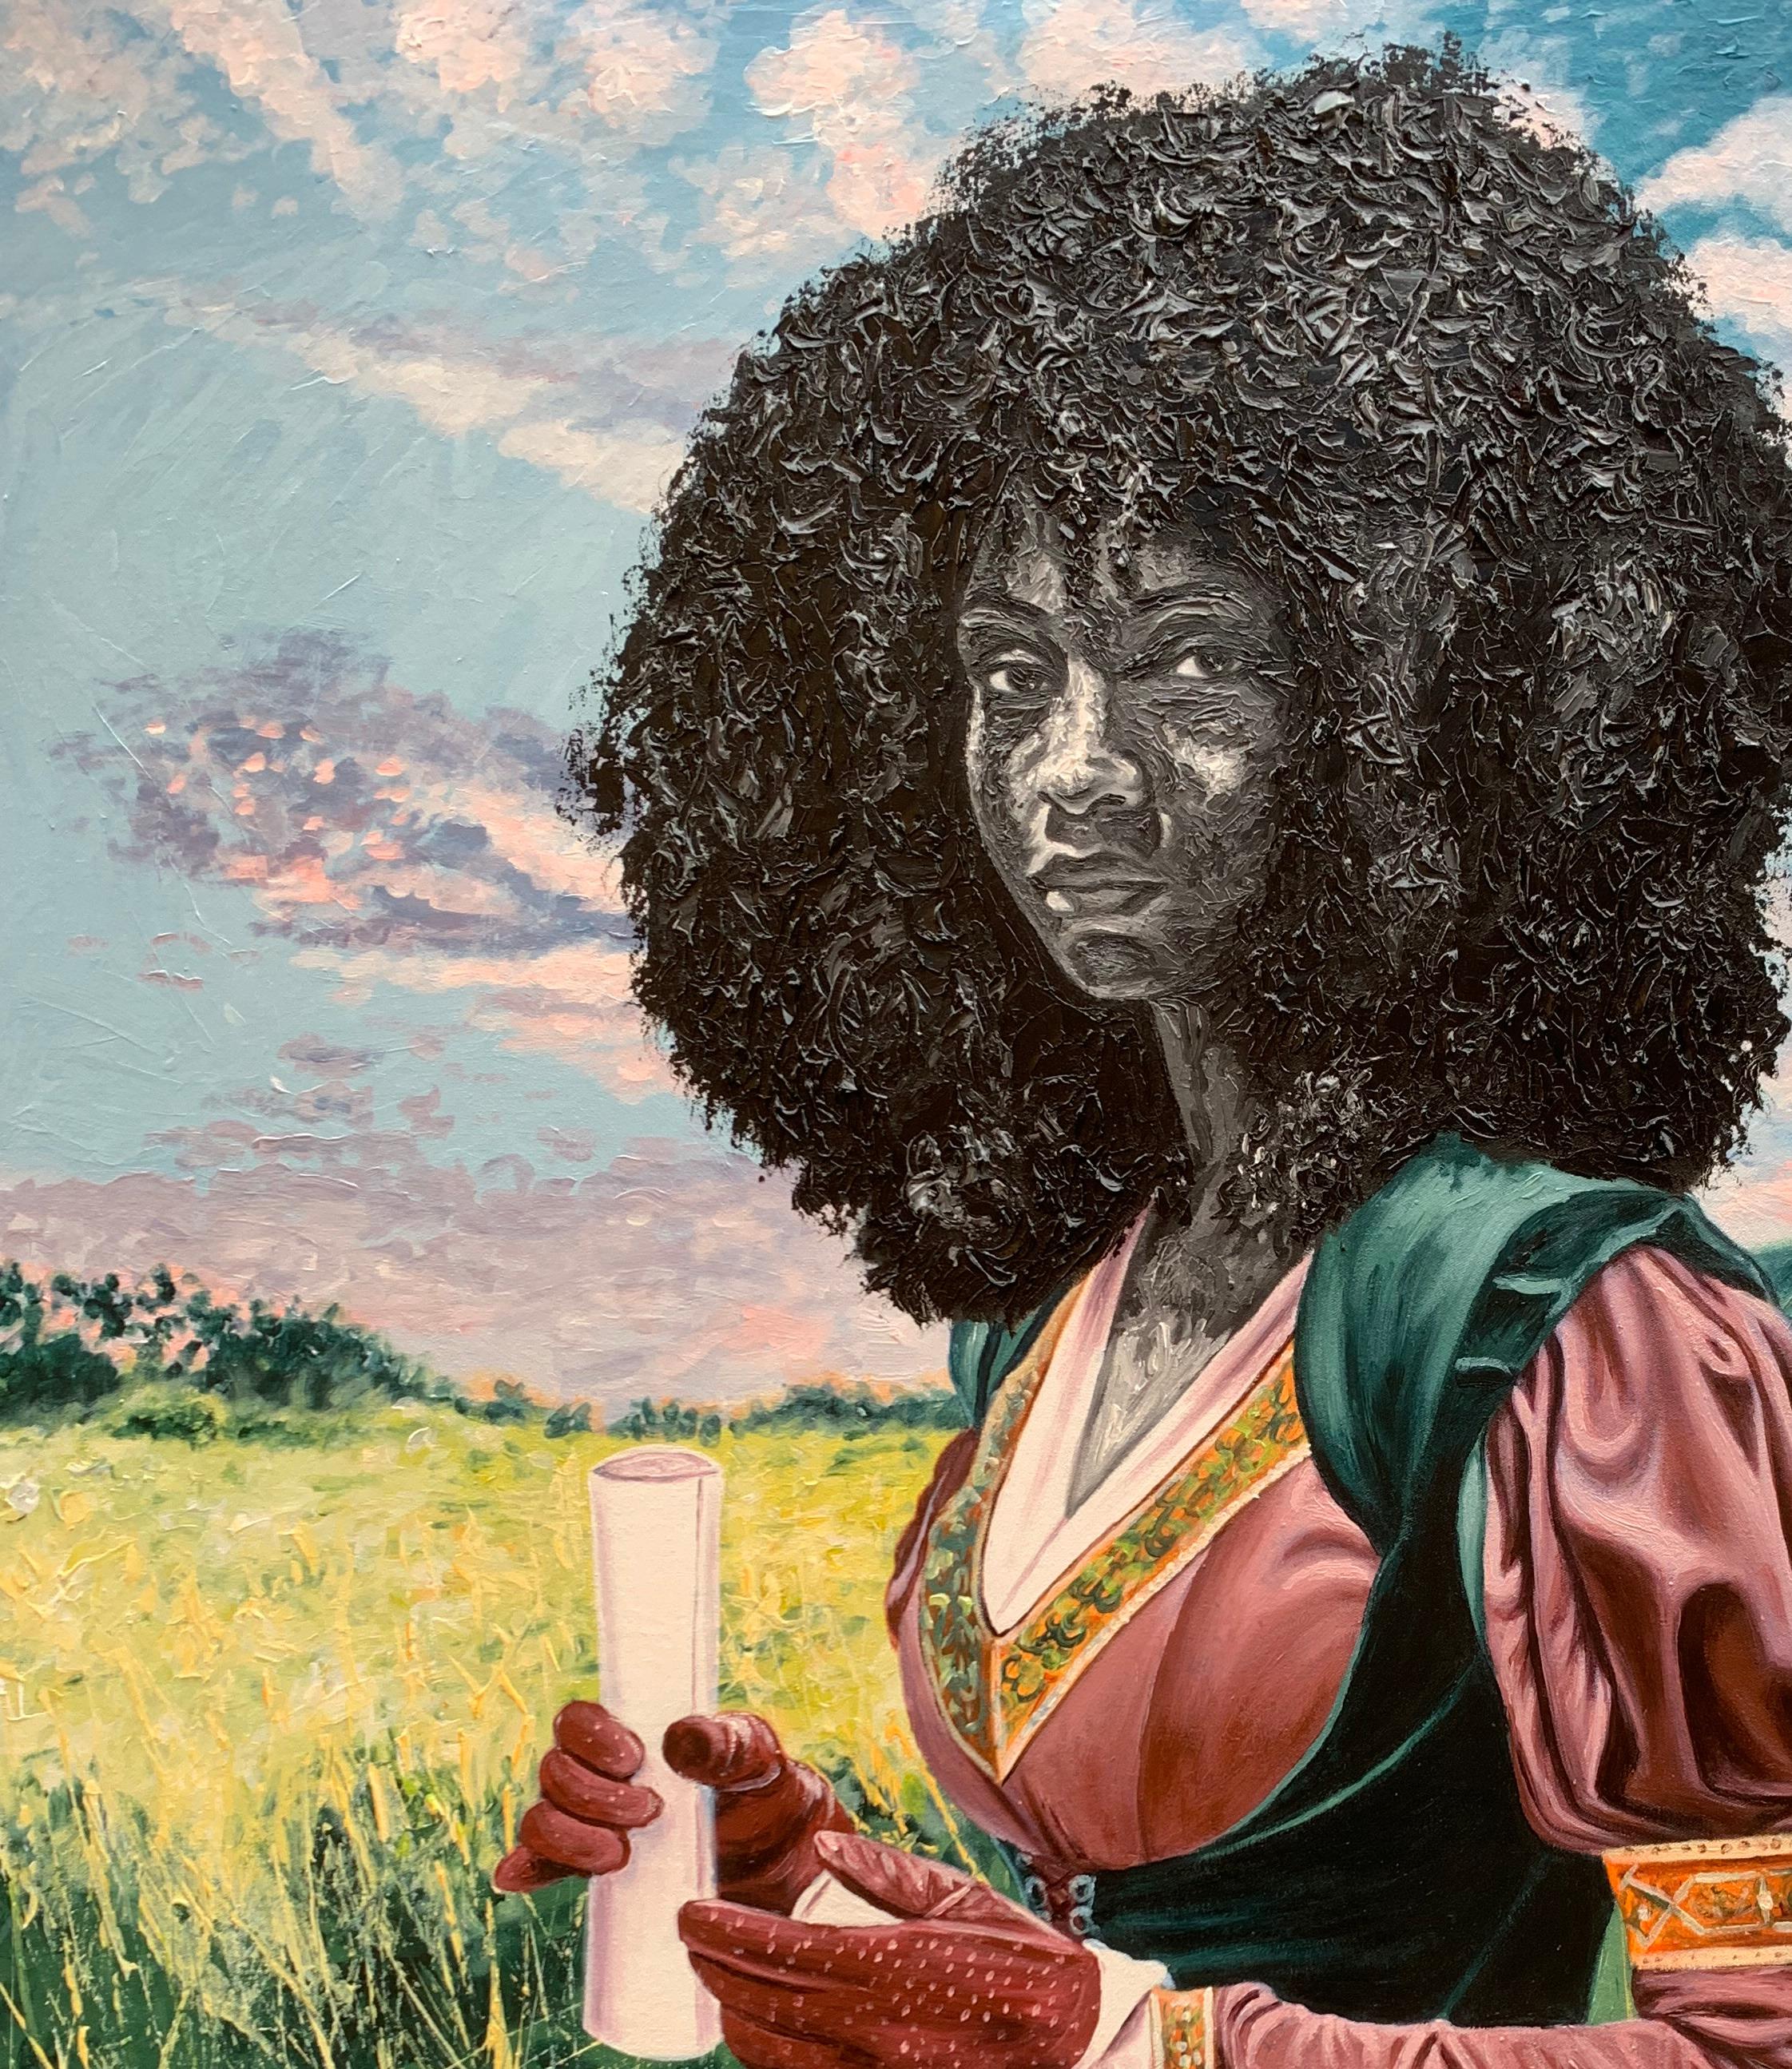 Ode to Self - Painting by Olaniyi Omotayo